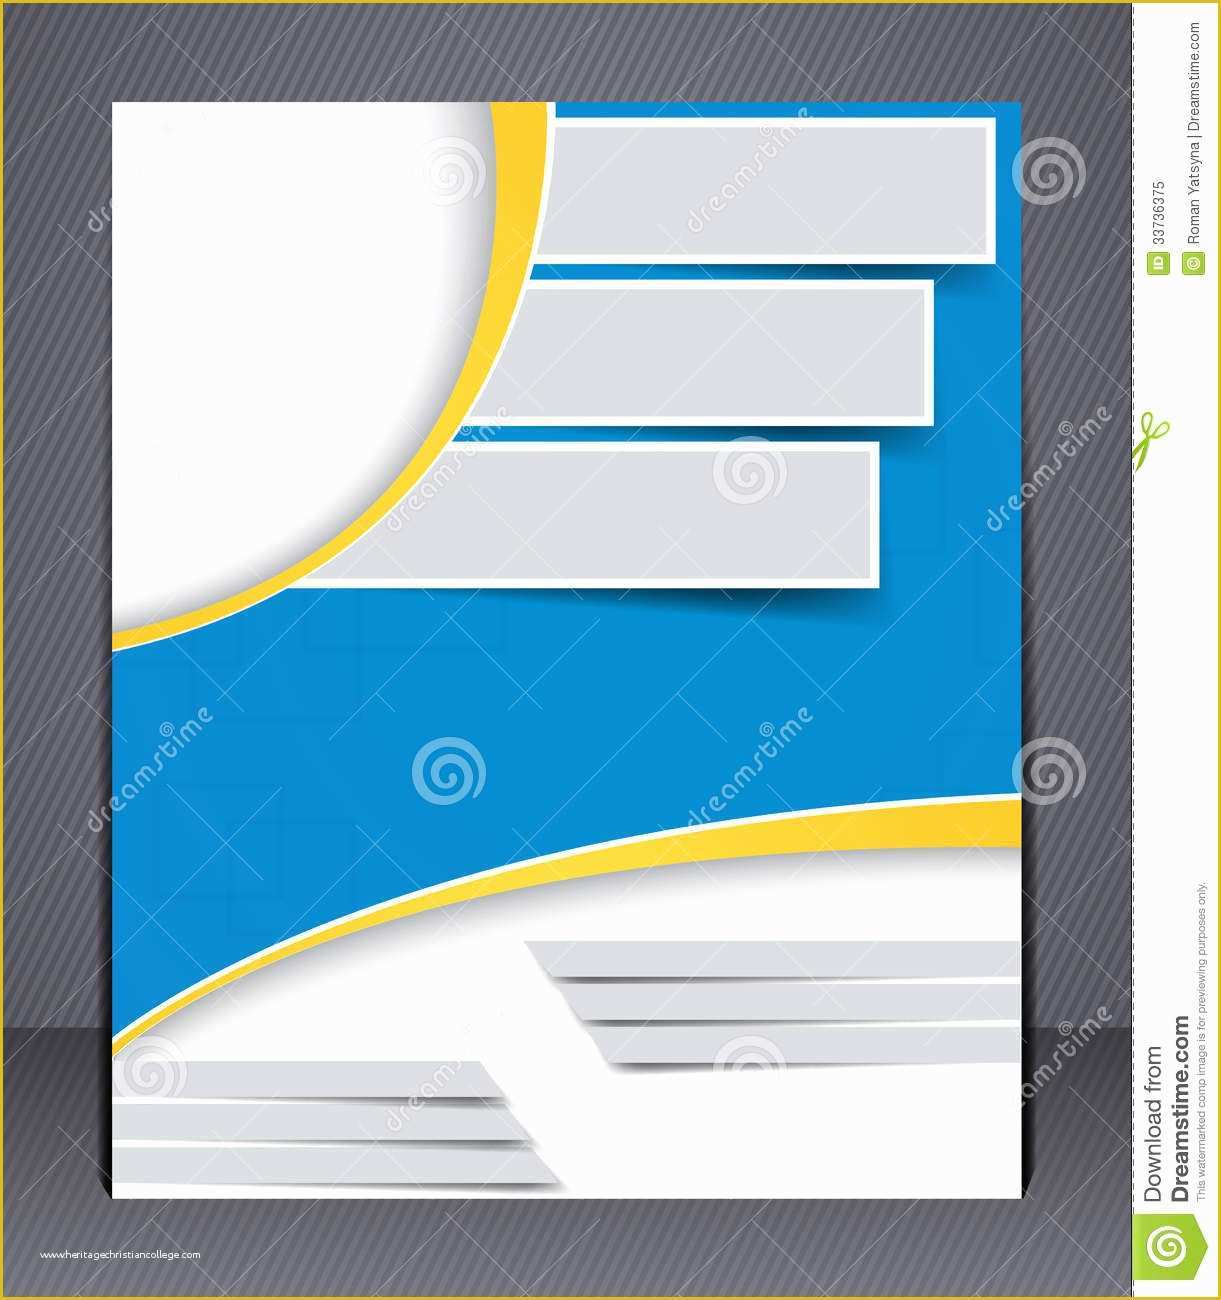 Yellow Pages Website Template Free Download Of Brochure Design In Blue and Yellow Colors Stock Vector